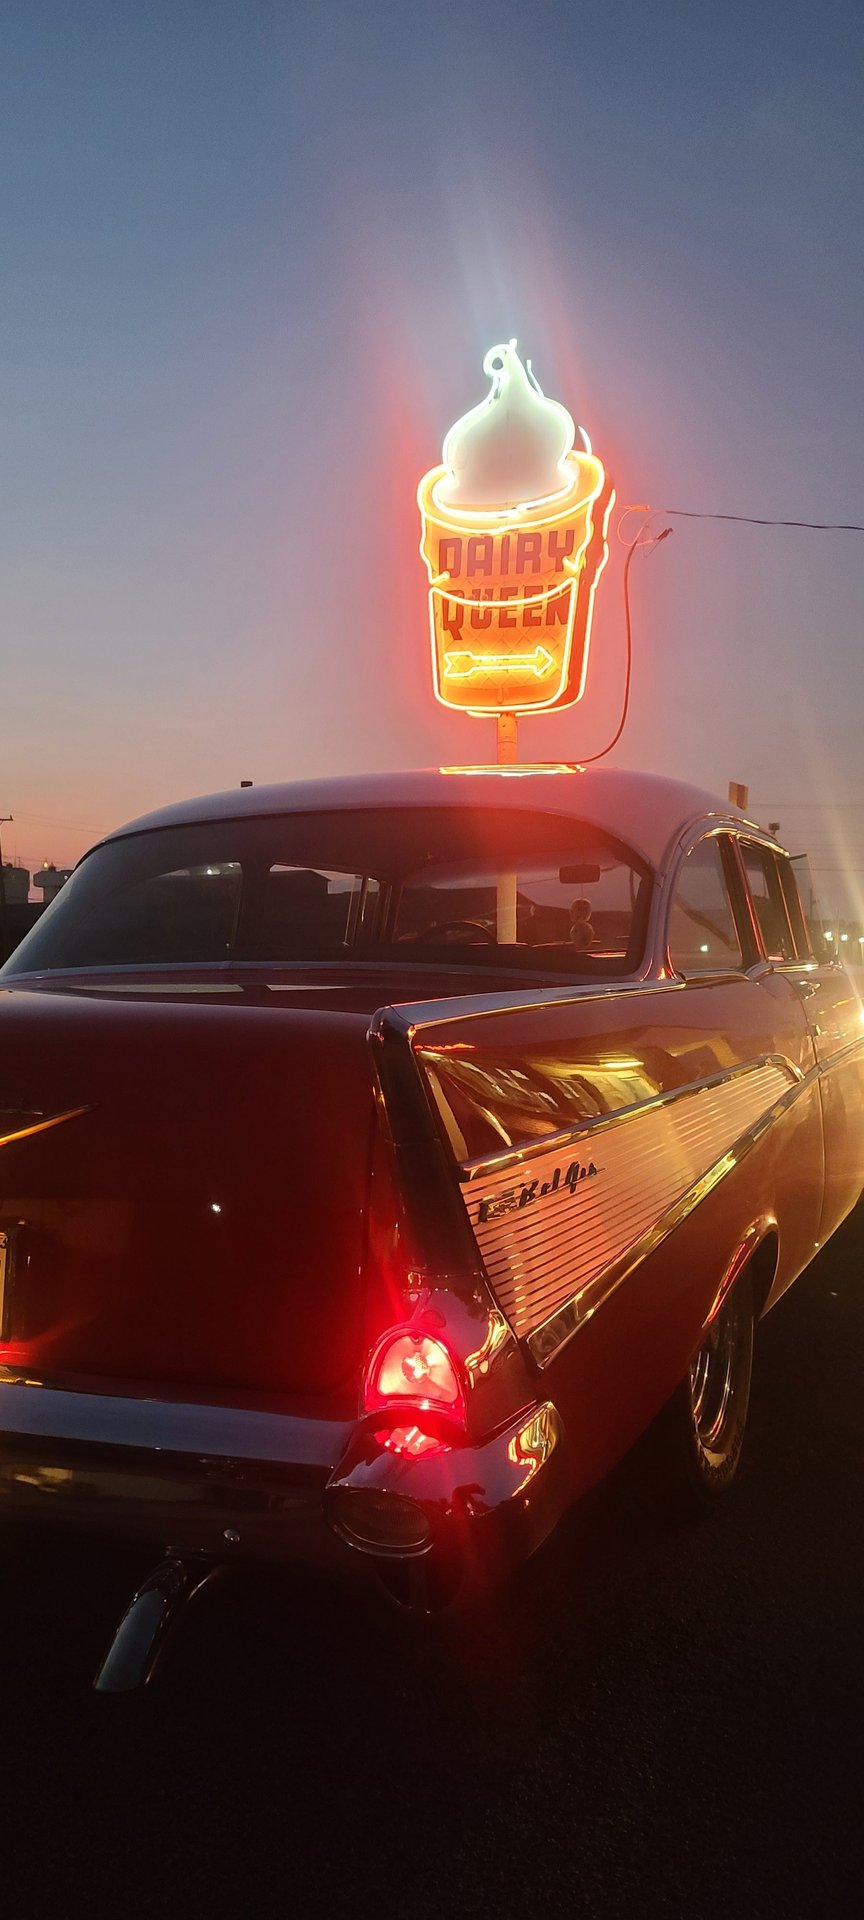 A classic car is parked in front of a neon ice cream sign. - 50s